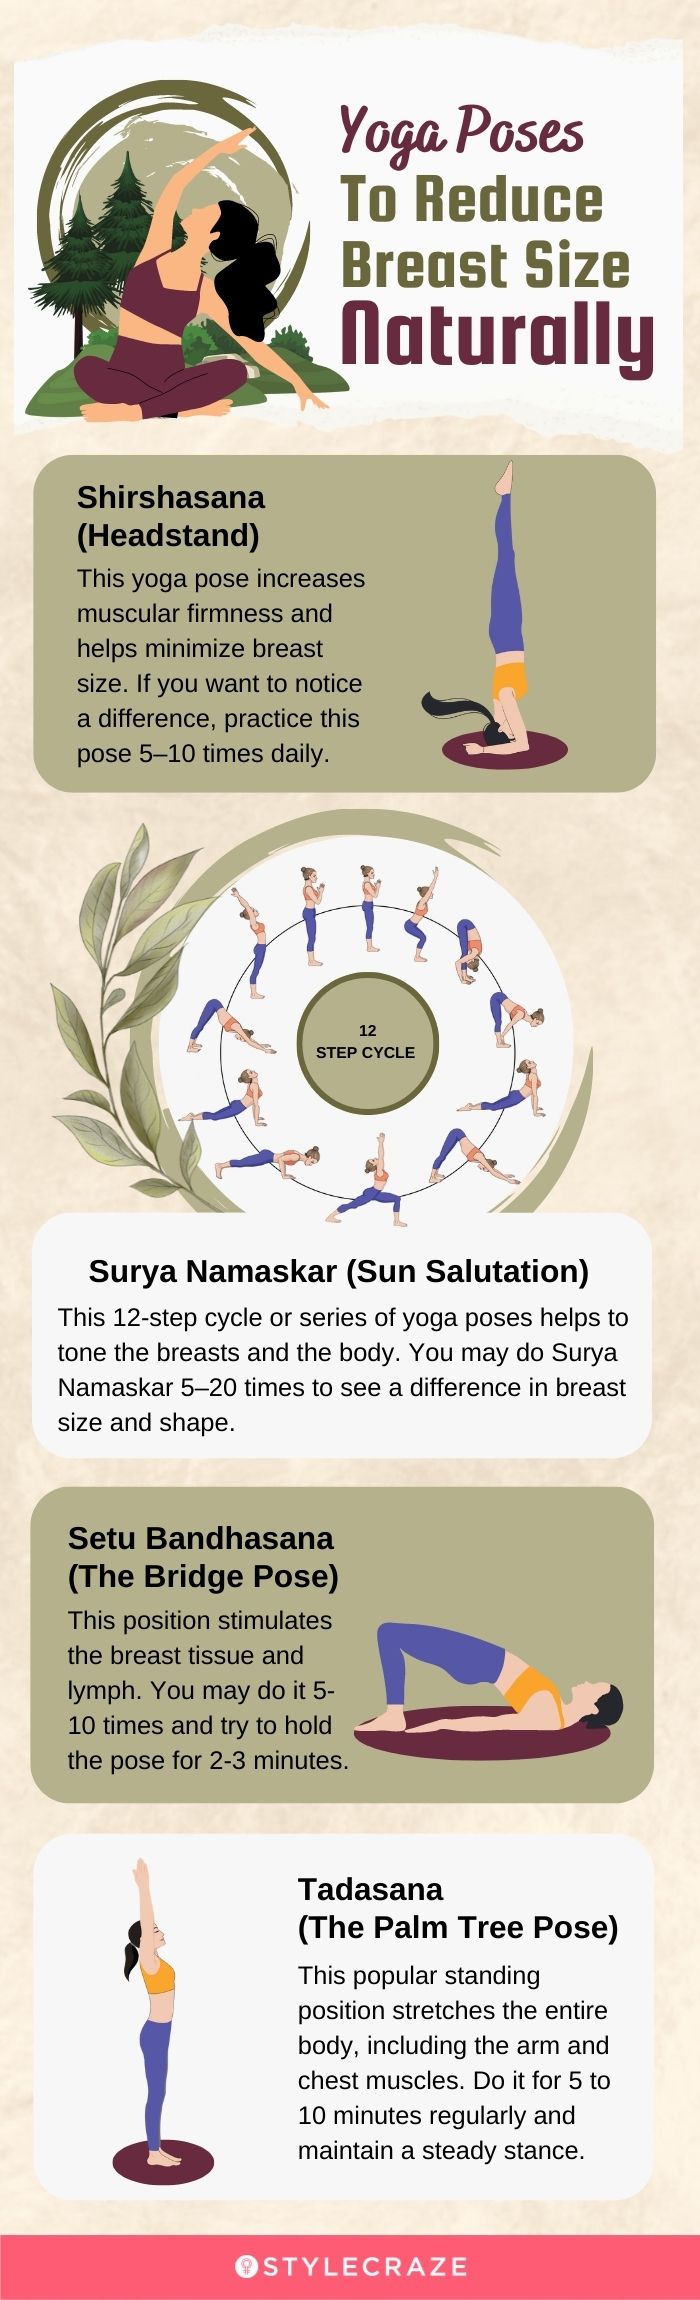 yoga poses to reduce breast size naturally (infographic)